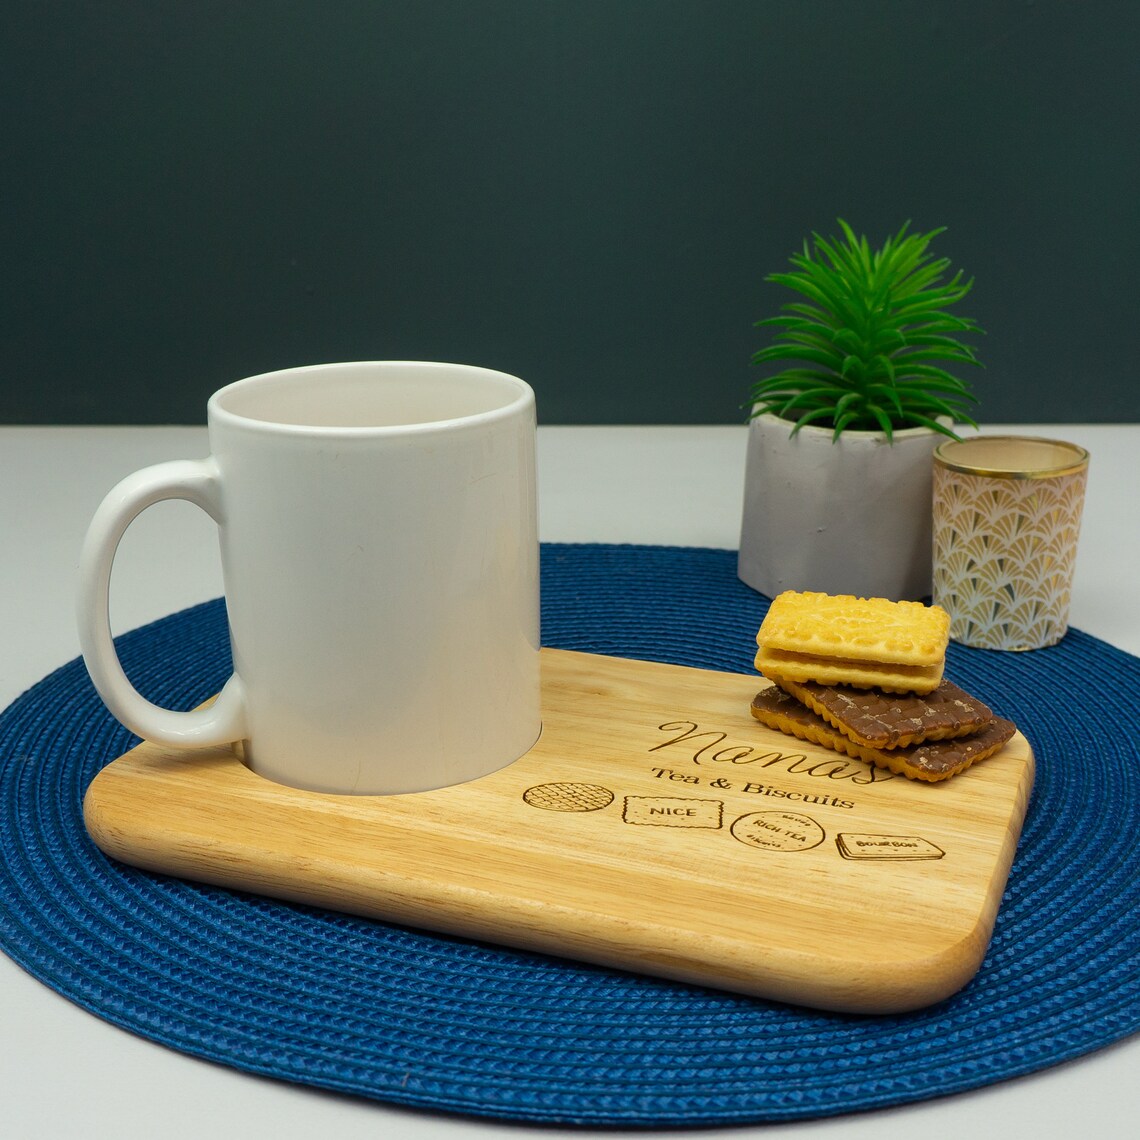 Personalised tea and biscuits serving tray